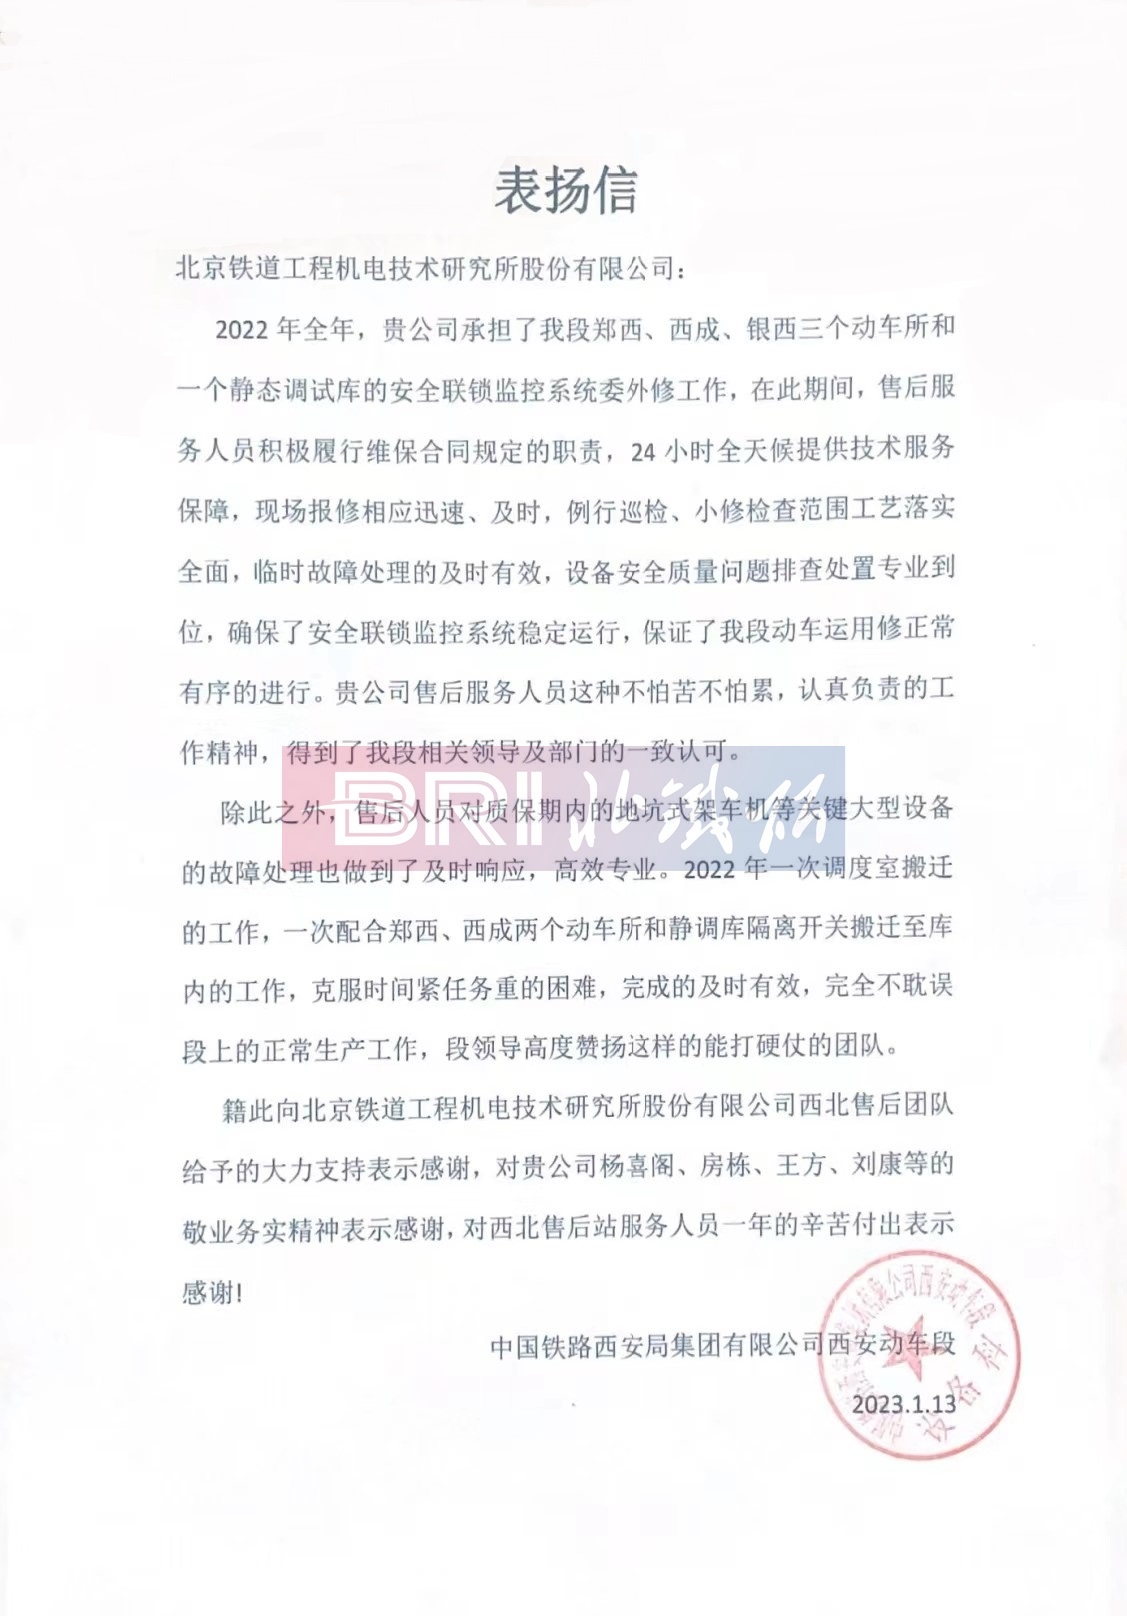 The commendation letter from Xian EMU Depot